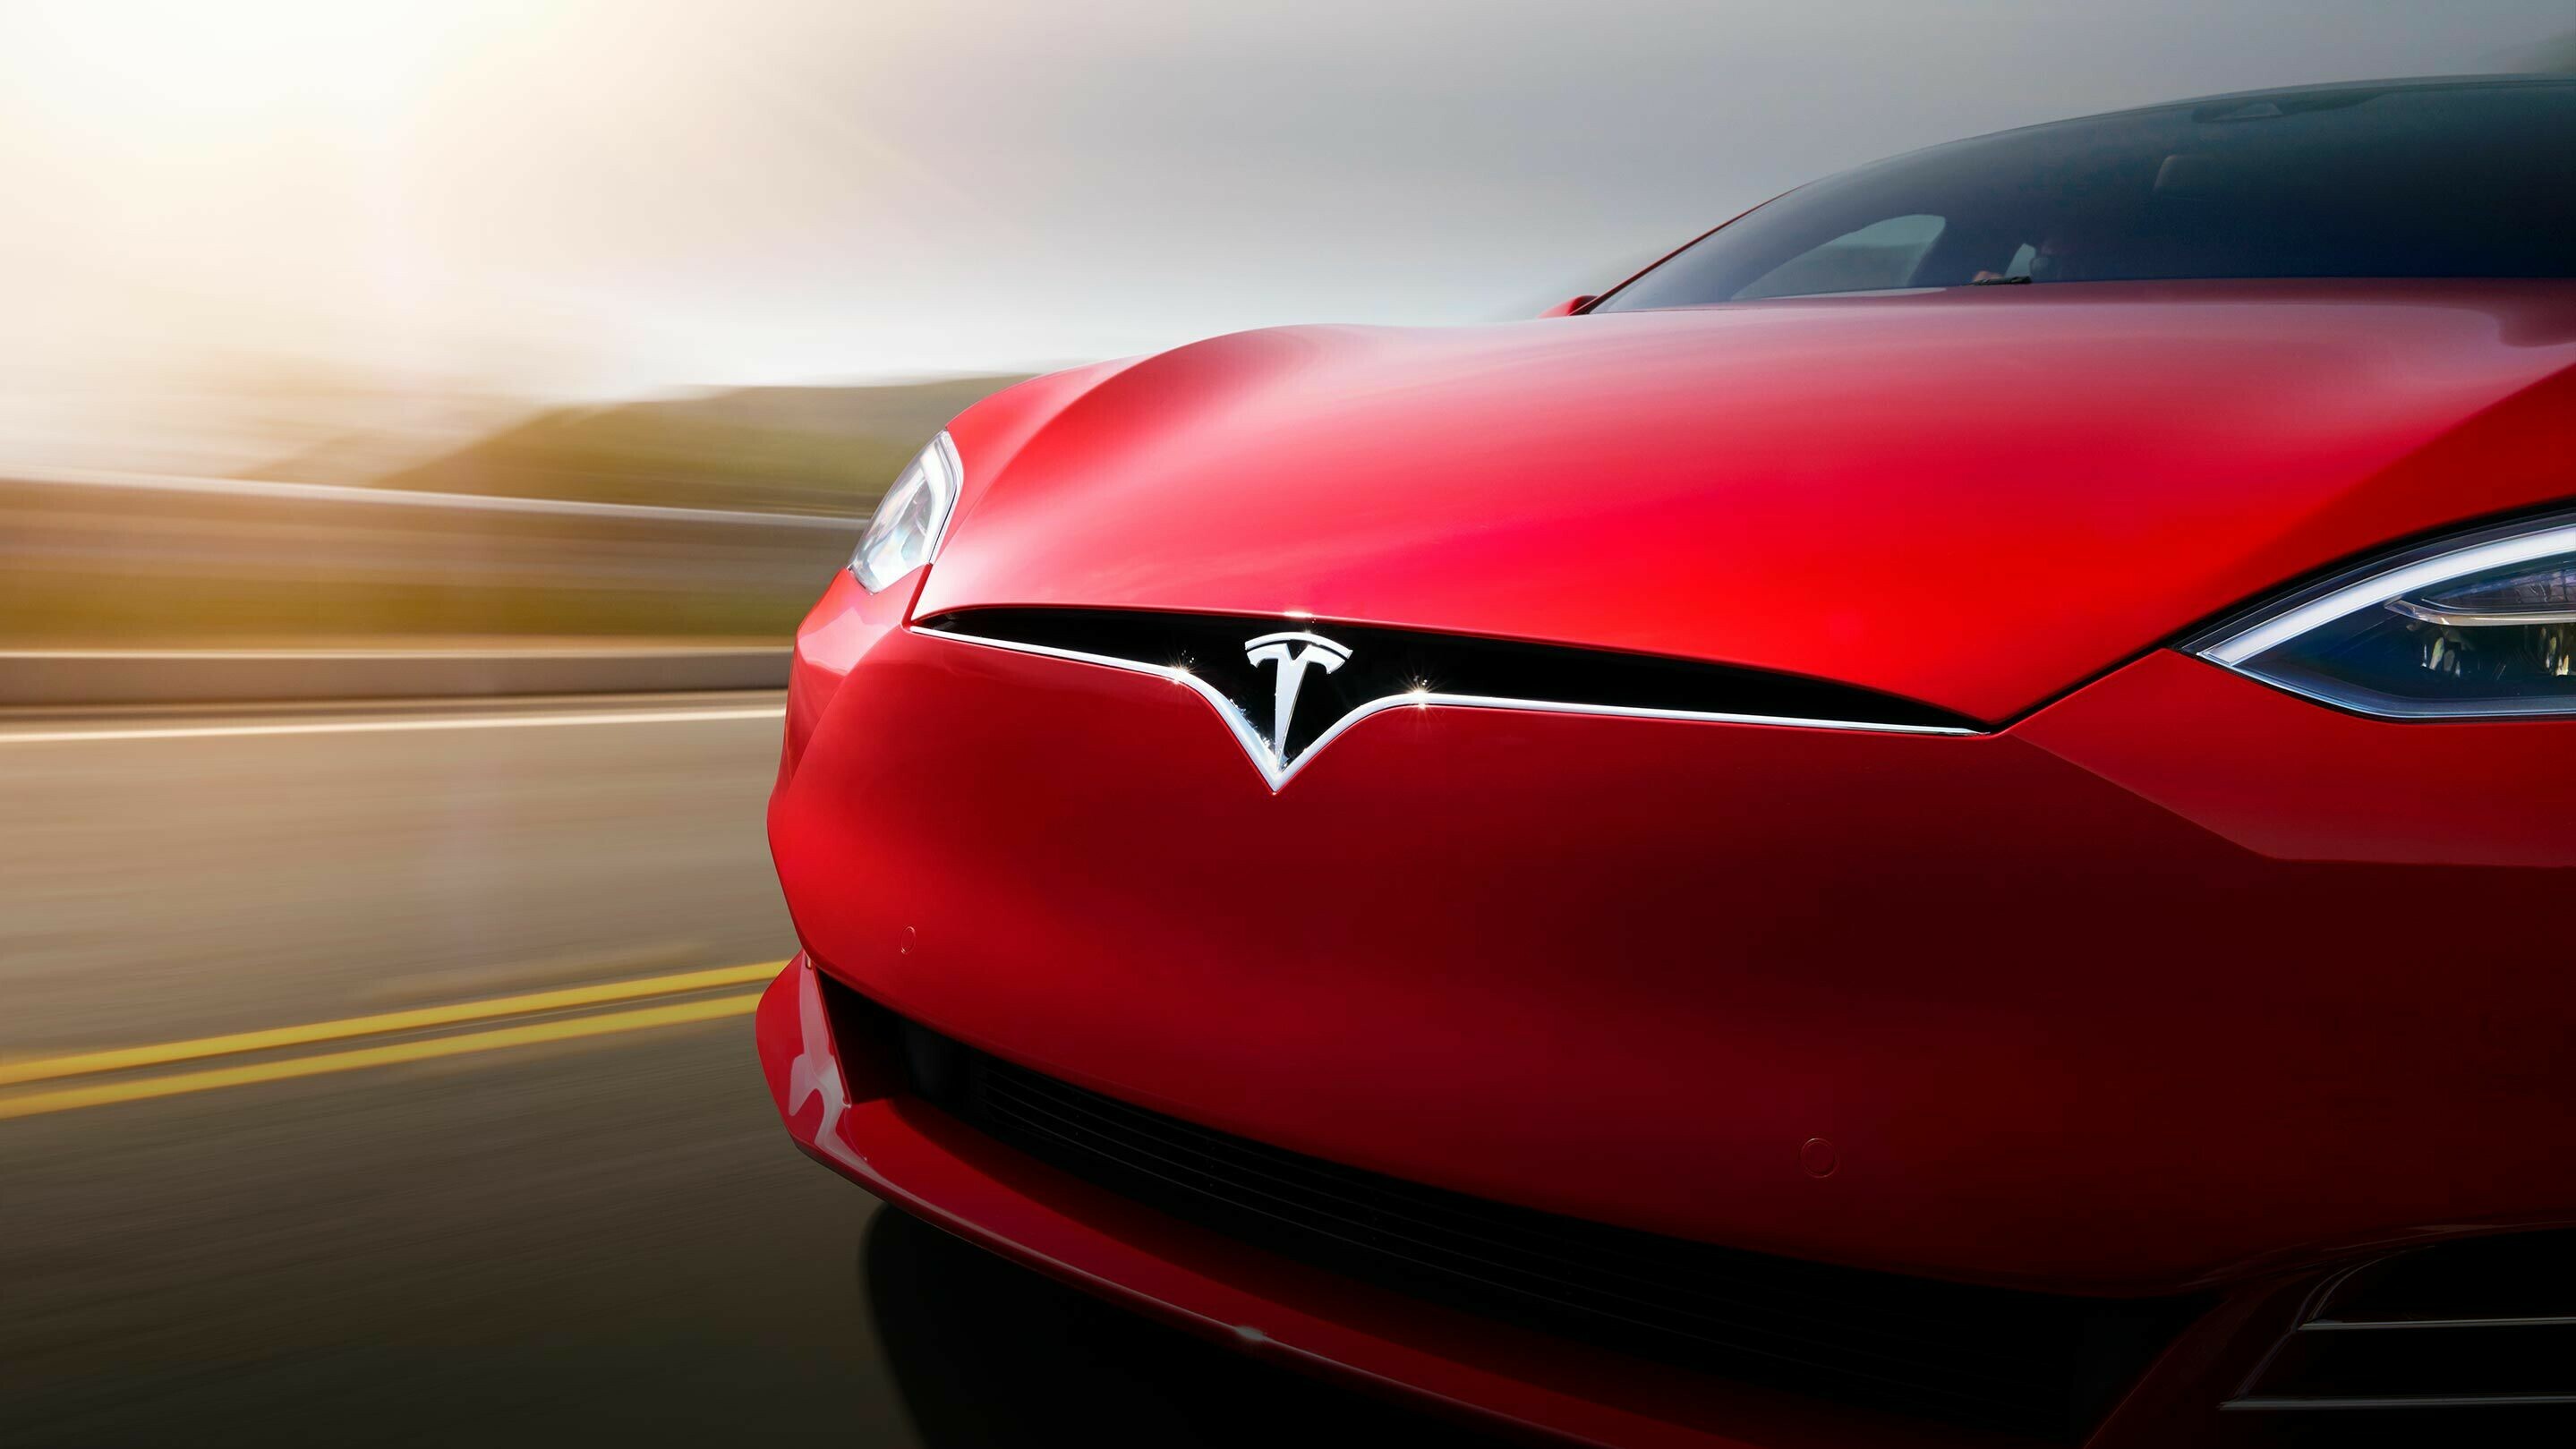 Tesla Model S: The manufacturer of battery electric vehicles, Flagship model. 2880x1620 HD Wallpaper.